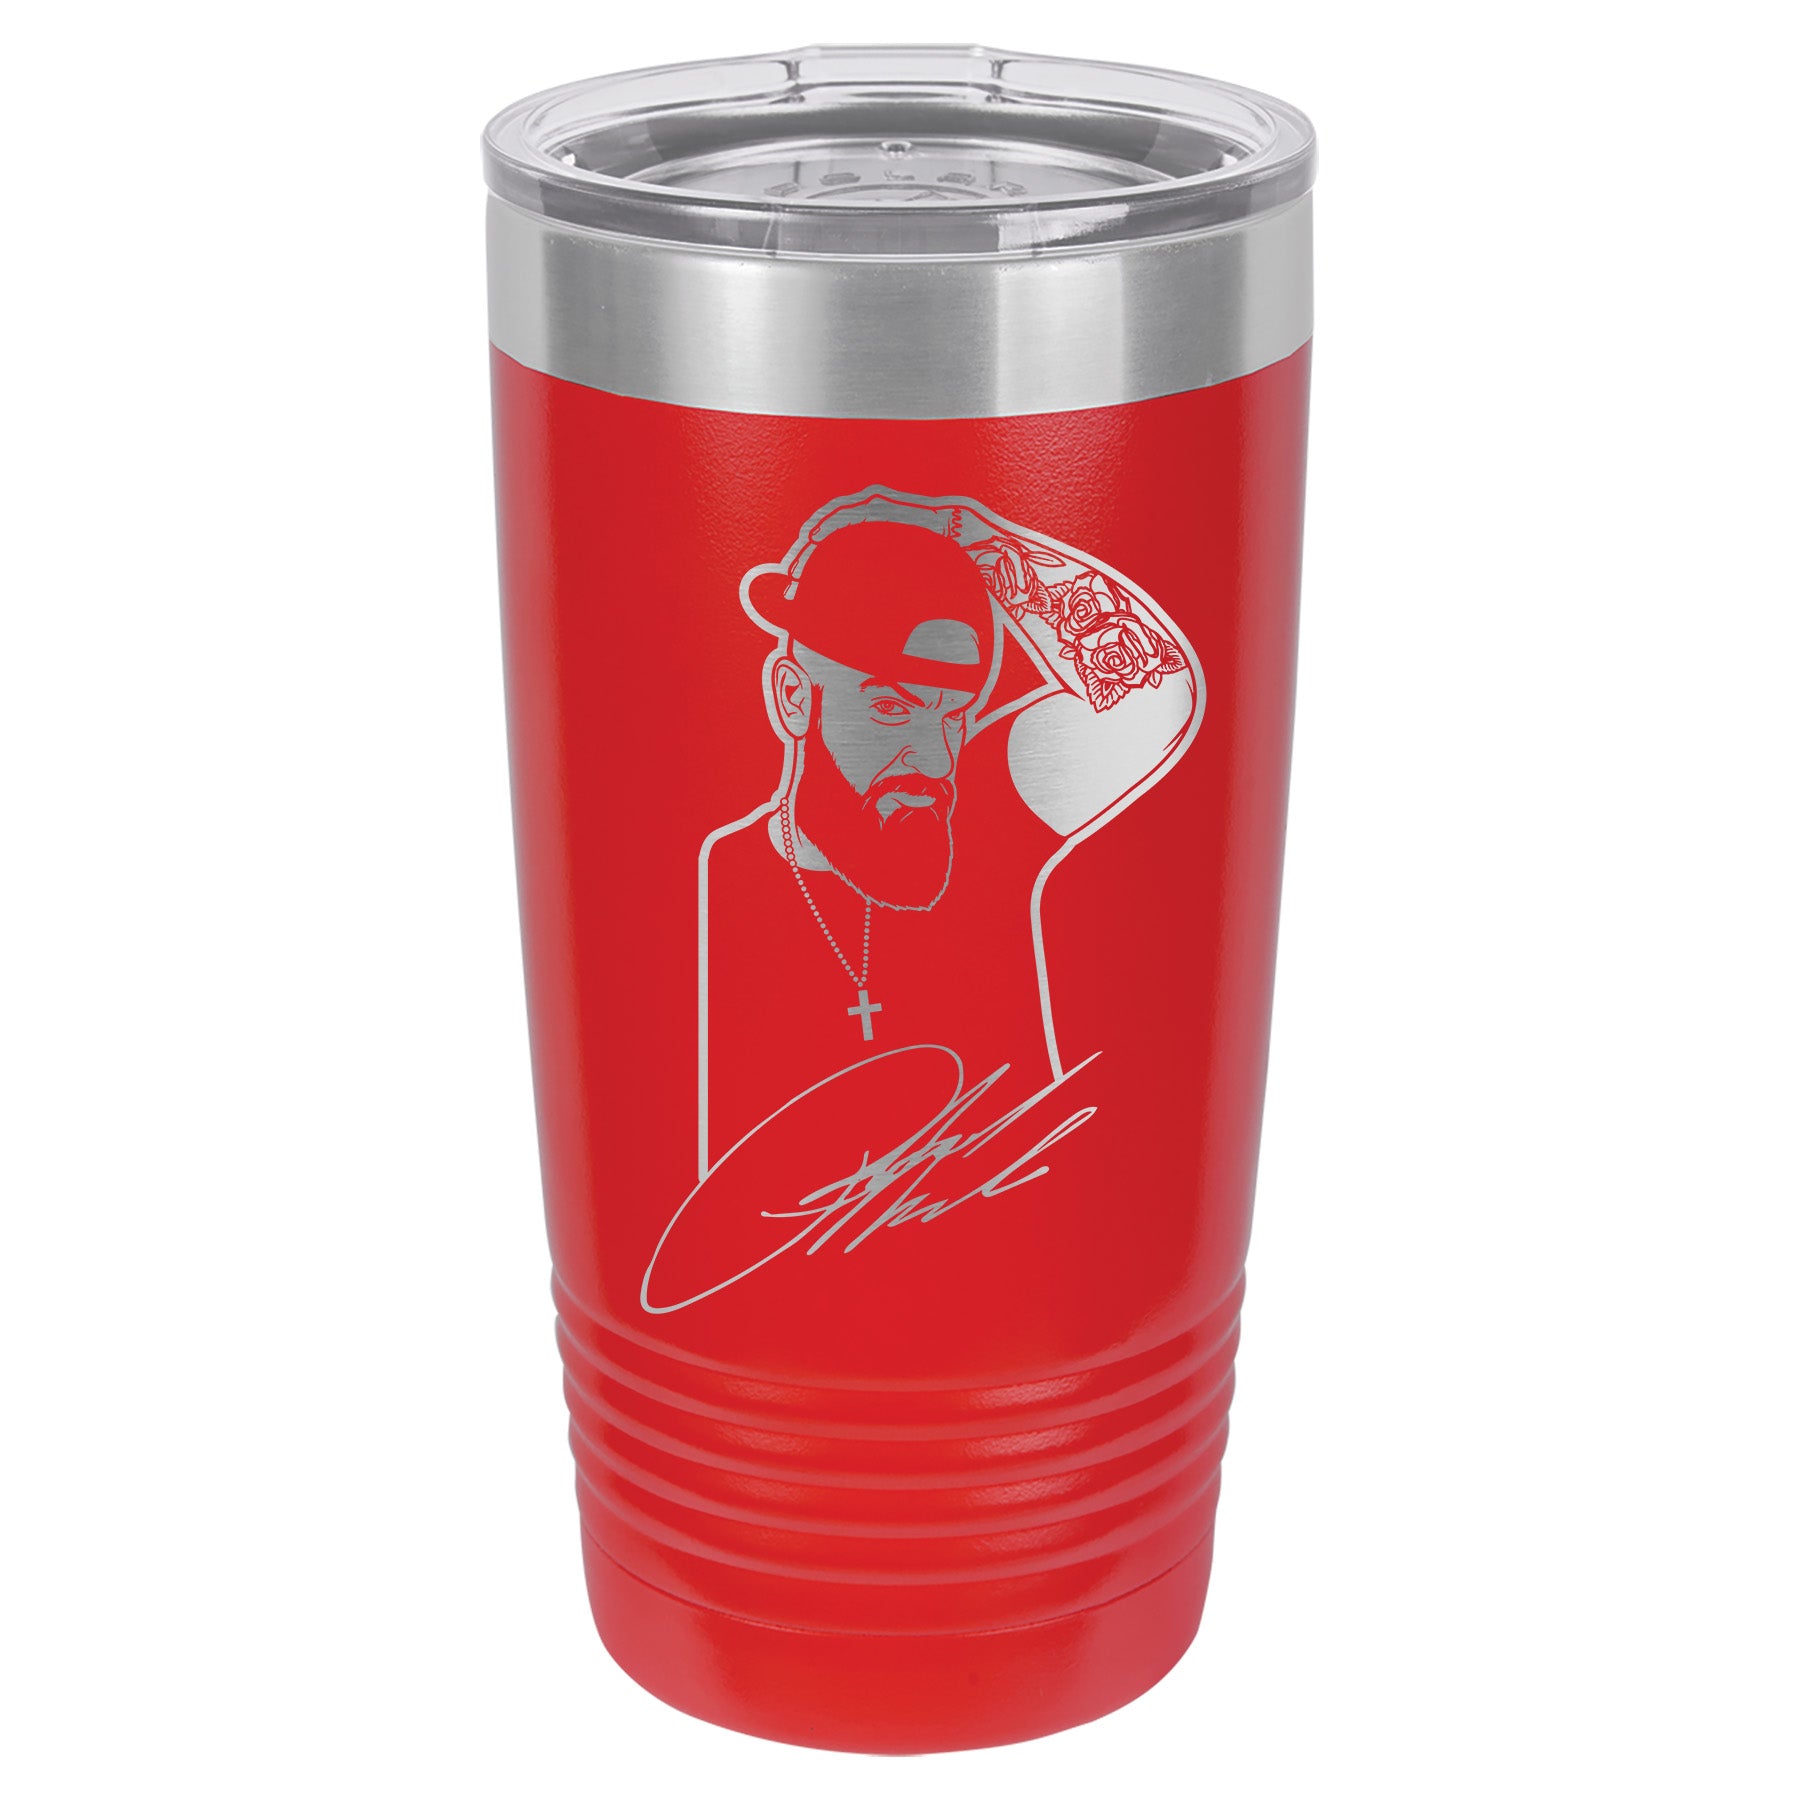 Rich Malone Custom Engraved Stainless Steel Tumbler